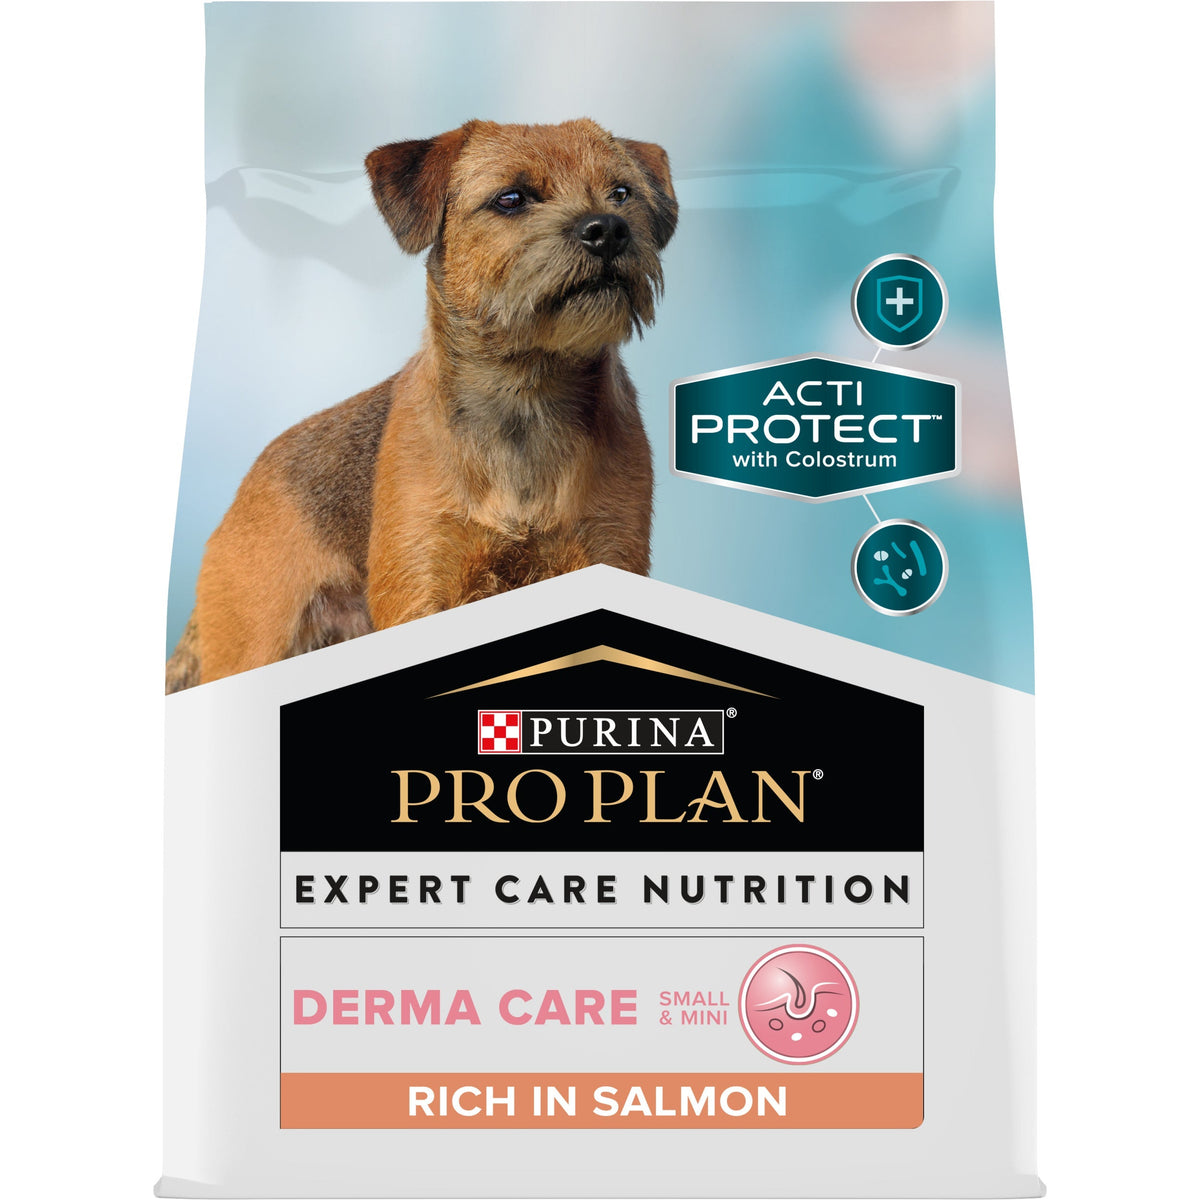 PURINA® PRO PLAN® Expert Care Nutrition - Canine Adult Small & Mini Derma Care - Salmon 1.5kg